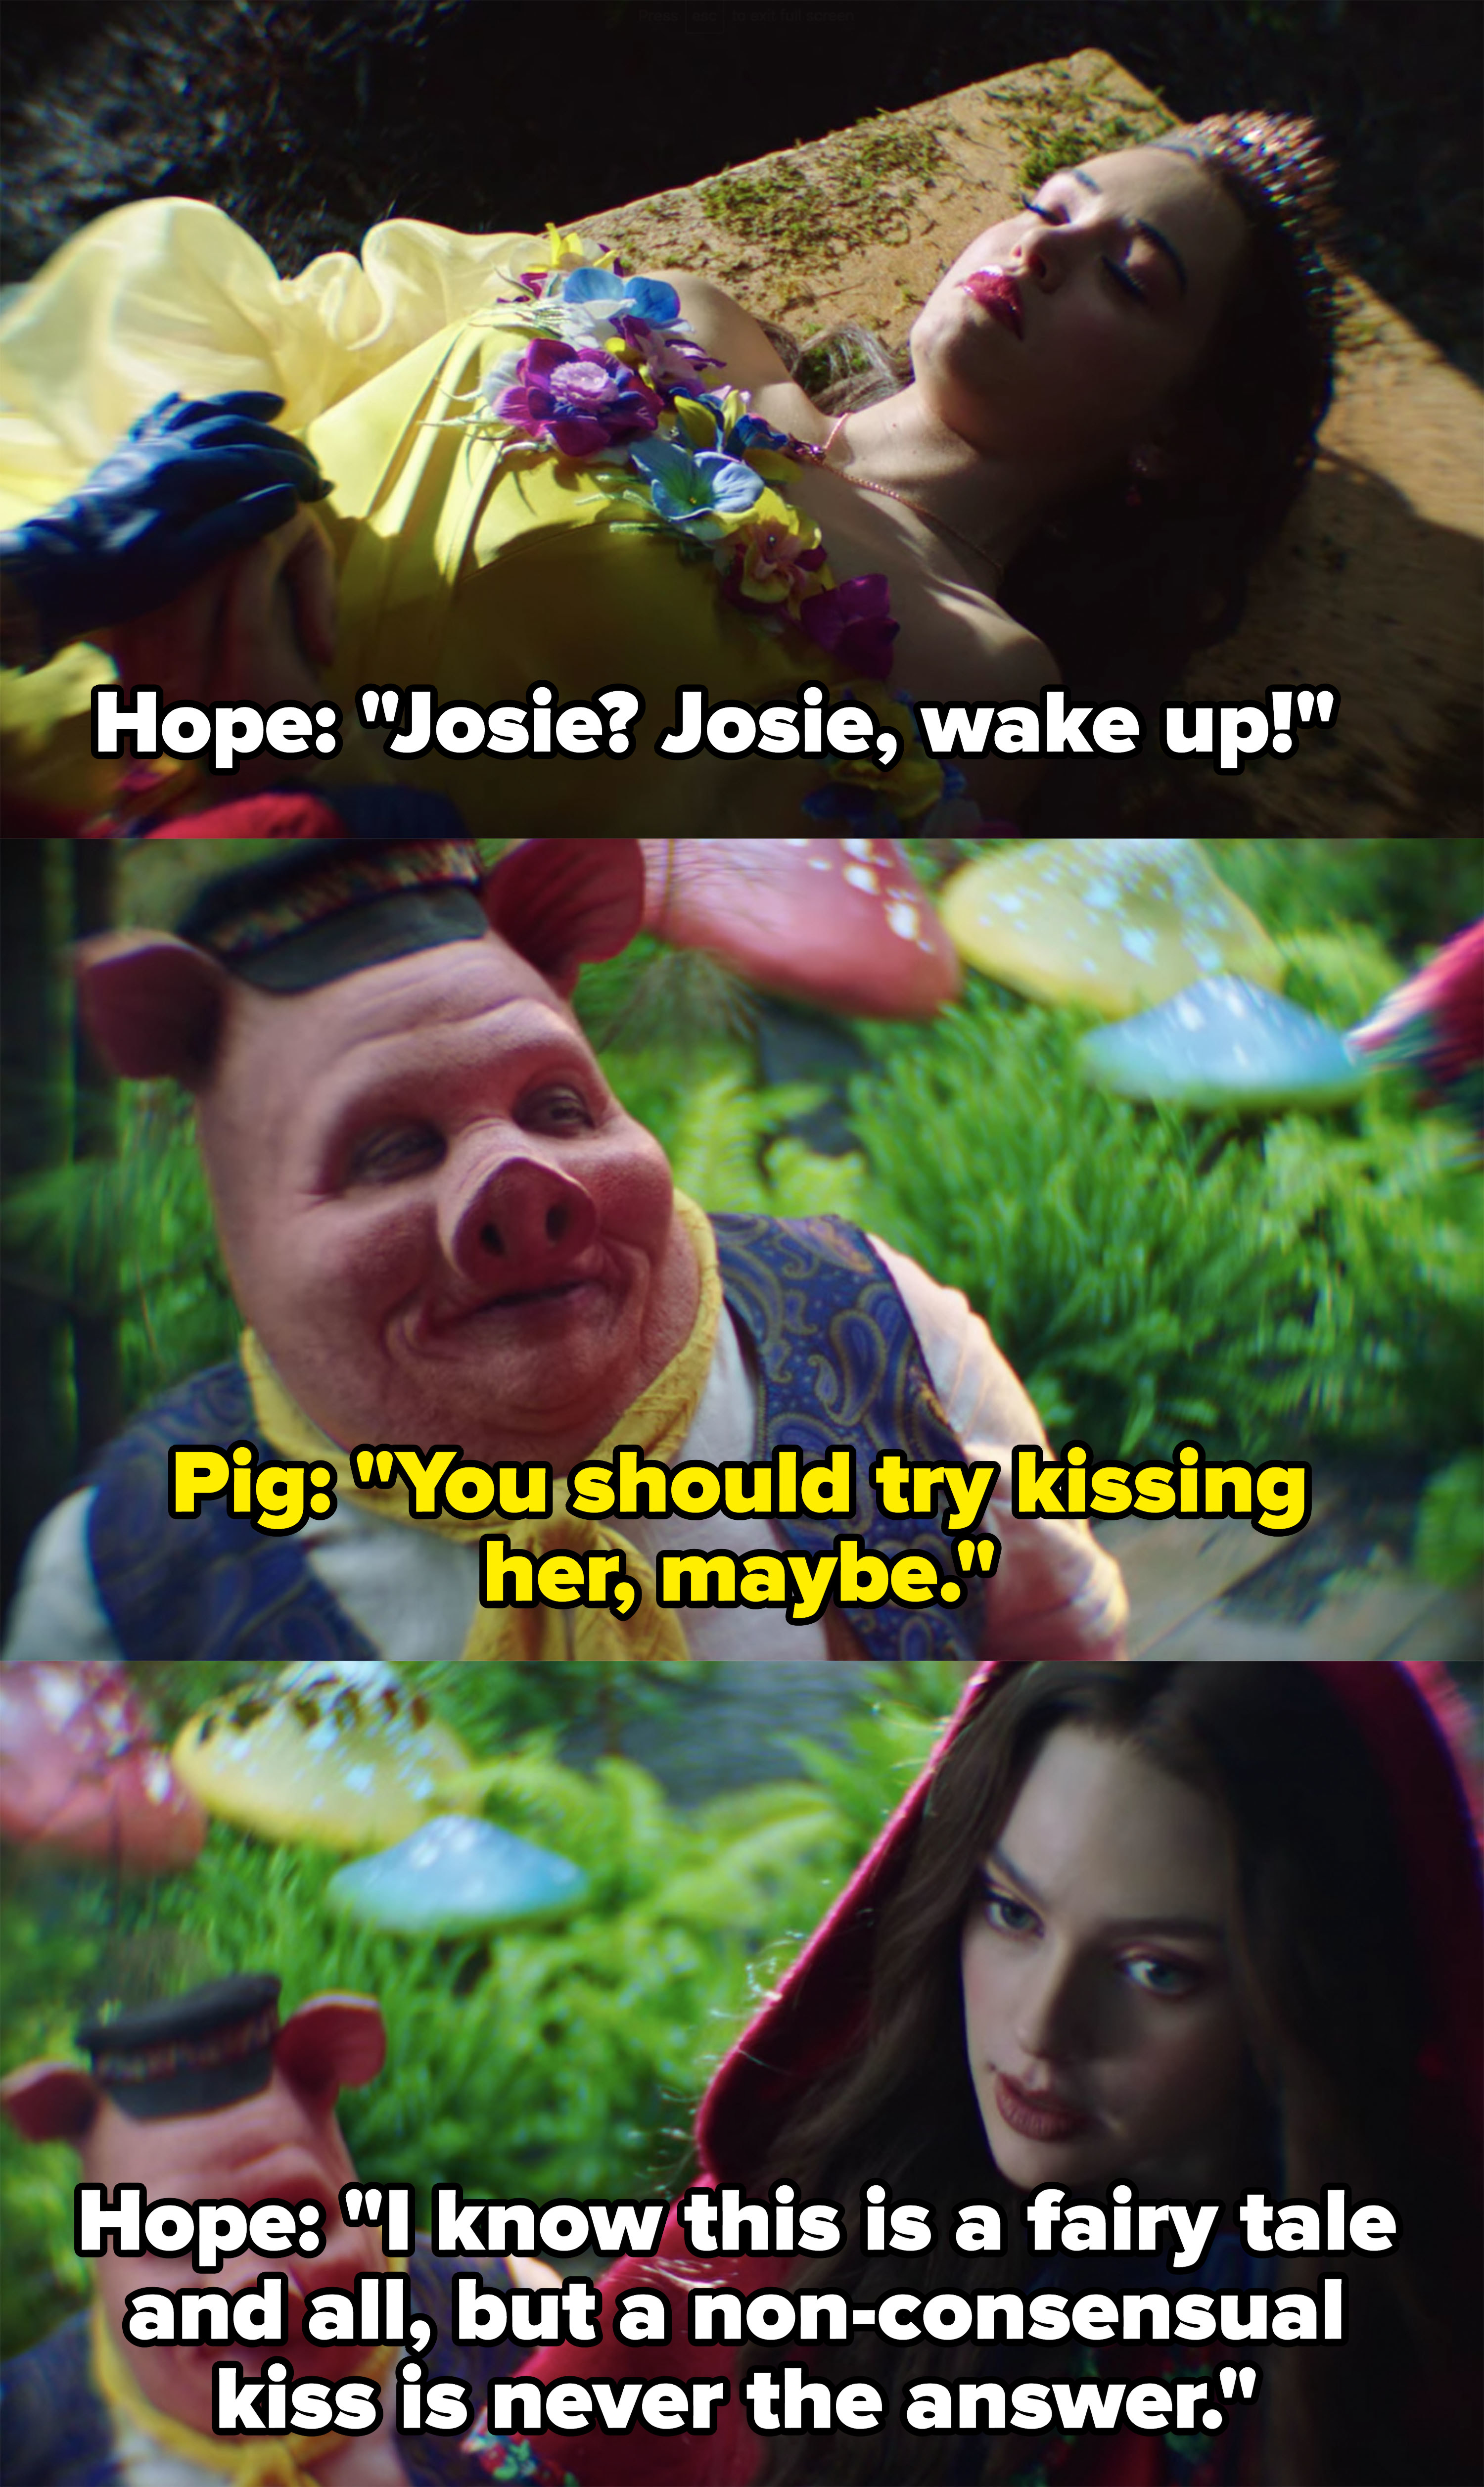 The pig suggests Hope try to kiss Josie to wake her up, Hope says &quot;a non-consensual kiss is never the answer&quot;